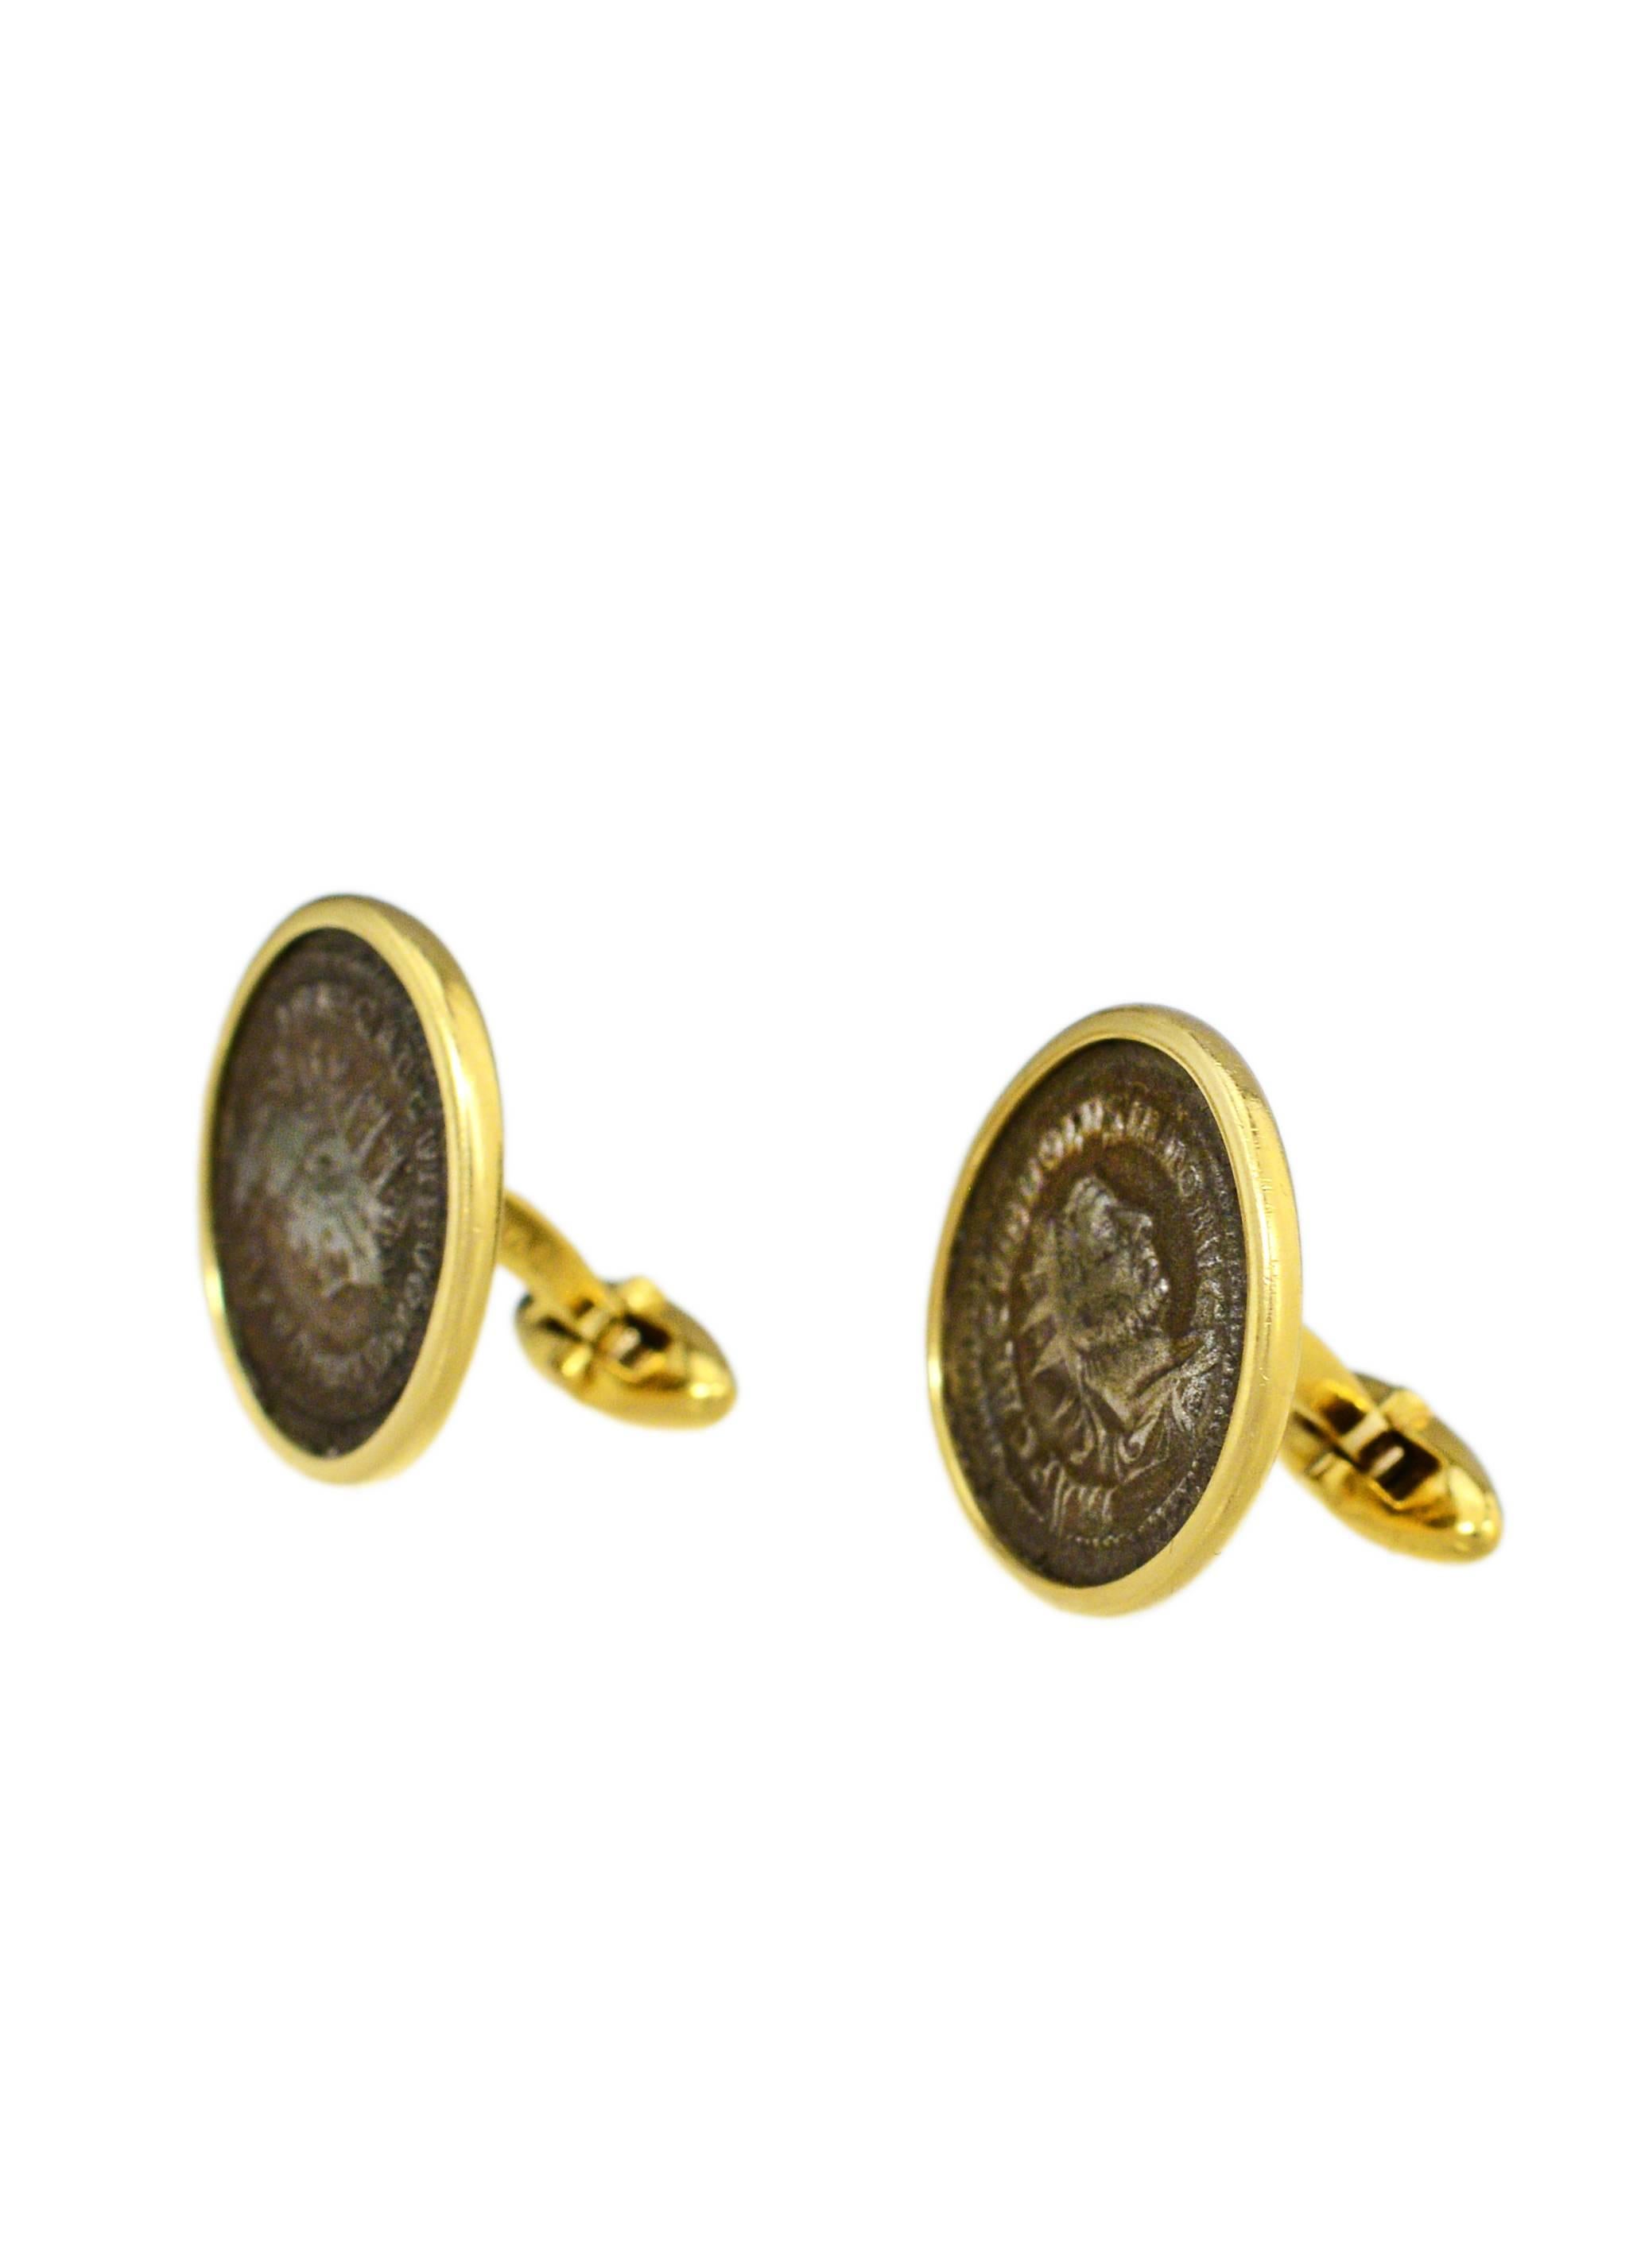 A pair of Bulgari 18K gold cufflinks with ancient coins. Coins date from 251 - 254 AD. Stamped BULGARI on reverse. Circa 1980's.

*Please contact for addition images or information. 